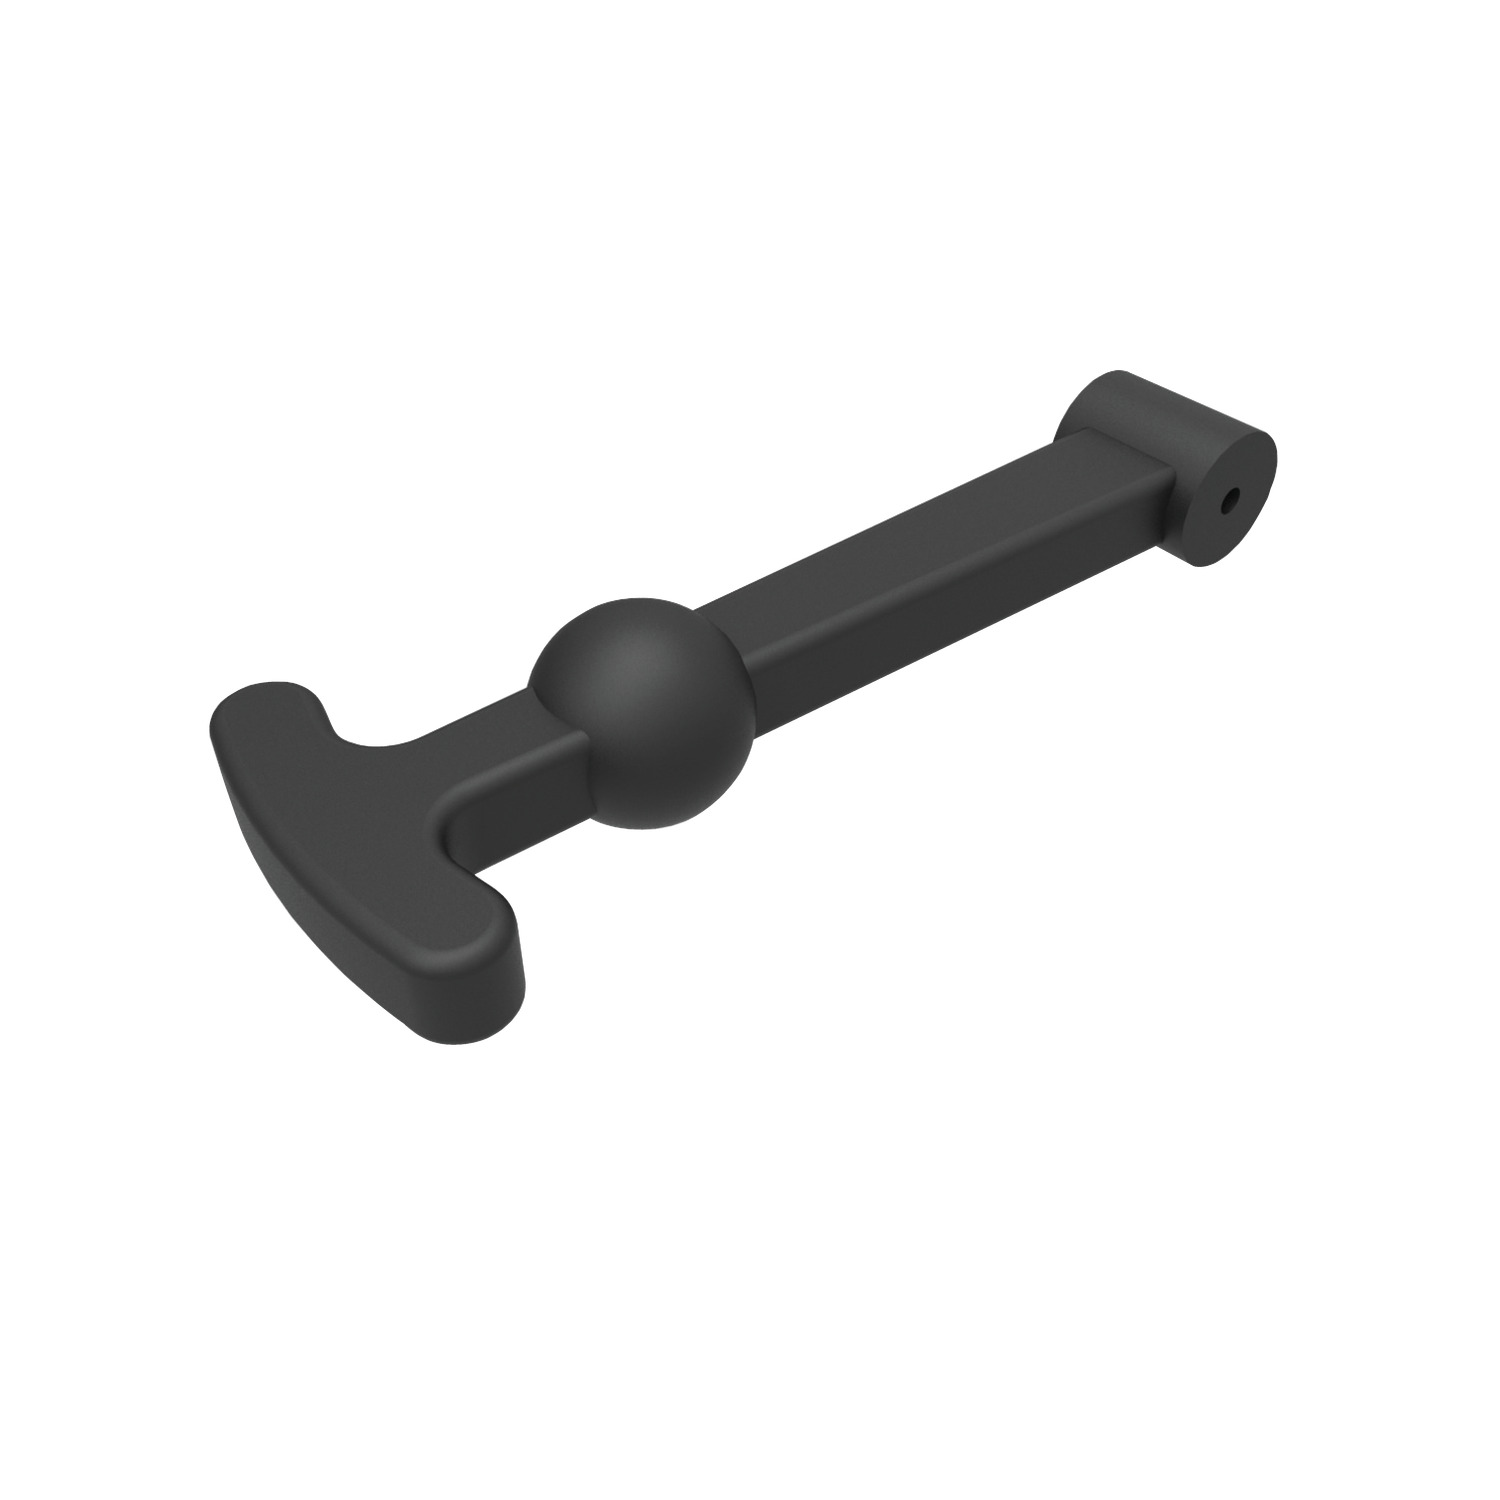 J0710.AC0148 Draw Latch flexible - T-handle Flexible Handle. Also known as 49420.W0148. Supplied in multiples of 10 Sold in multiples of 10